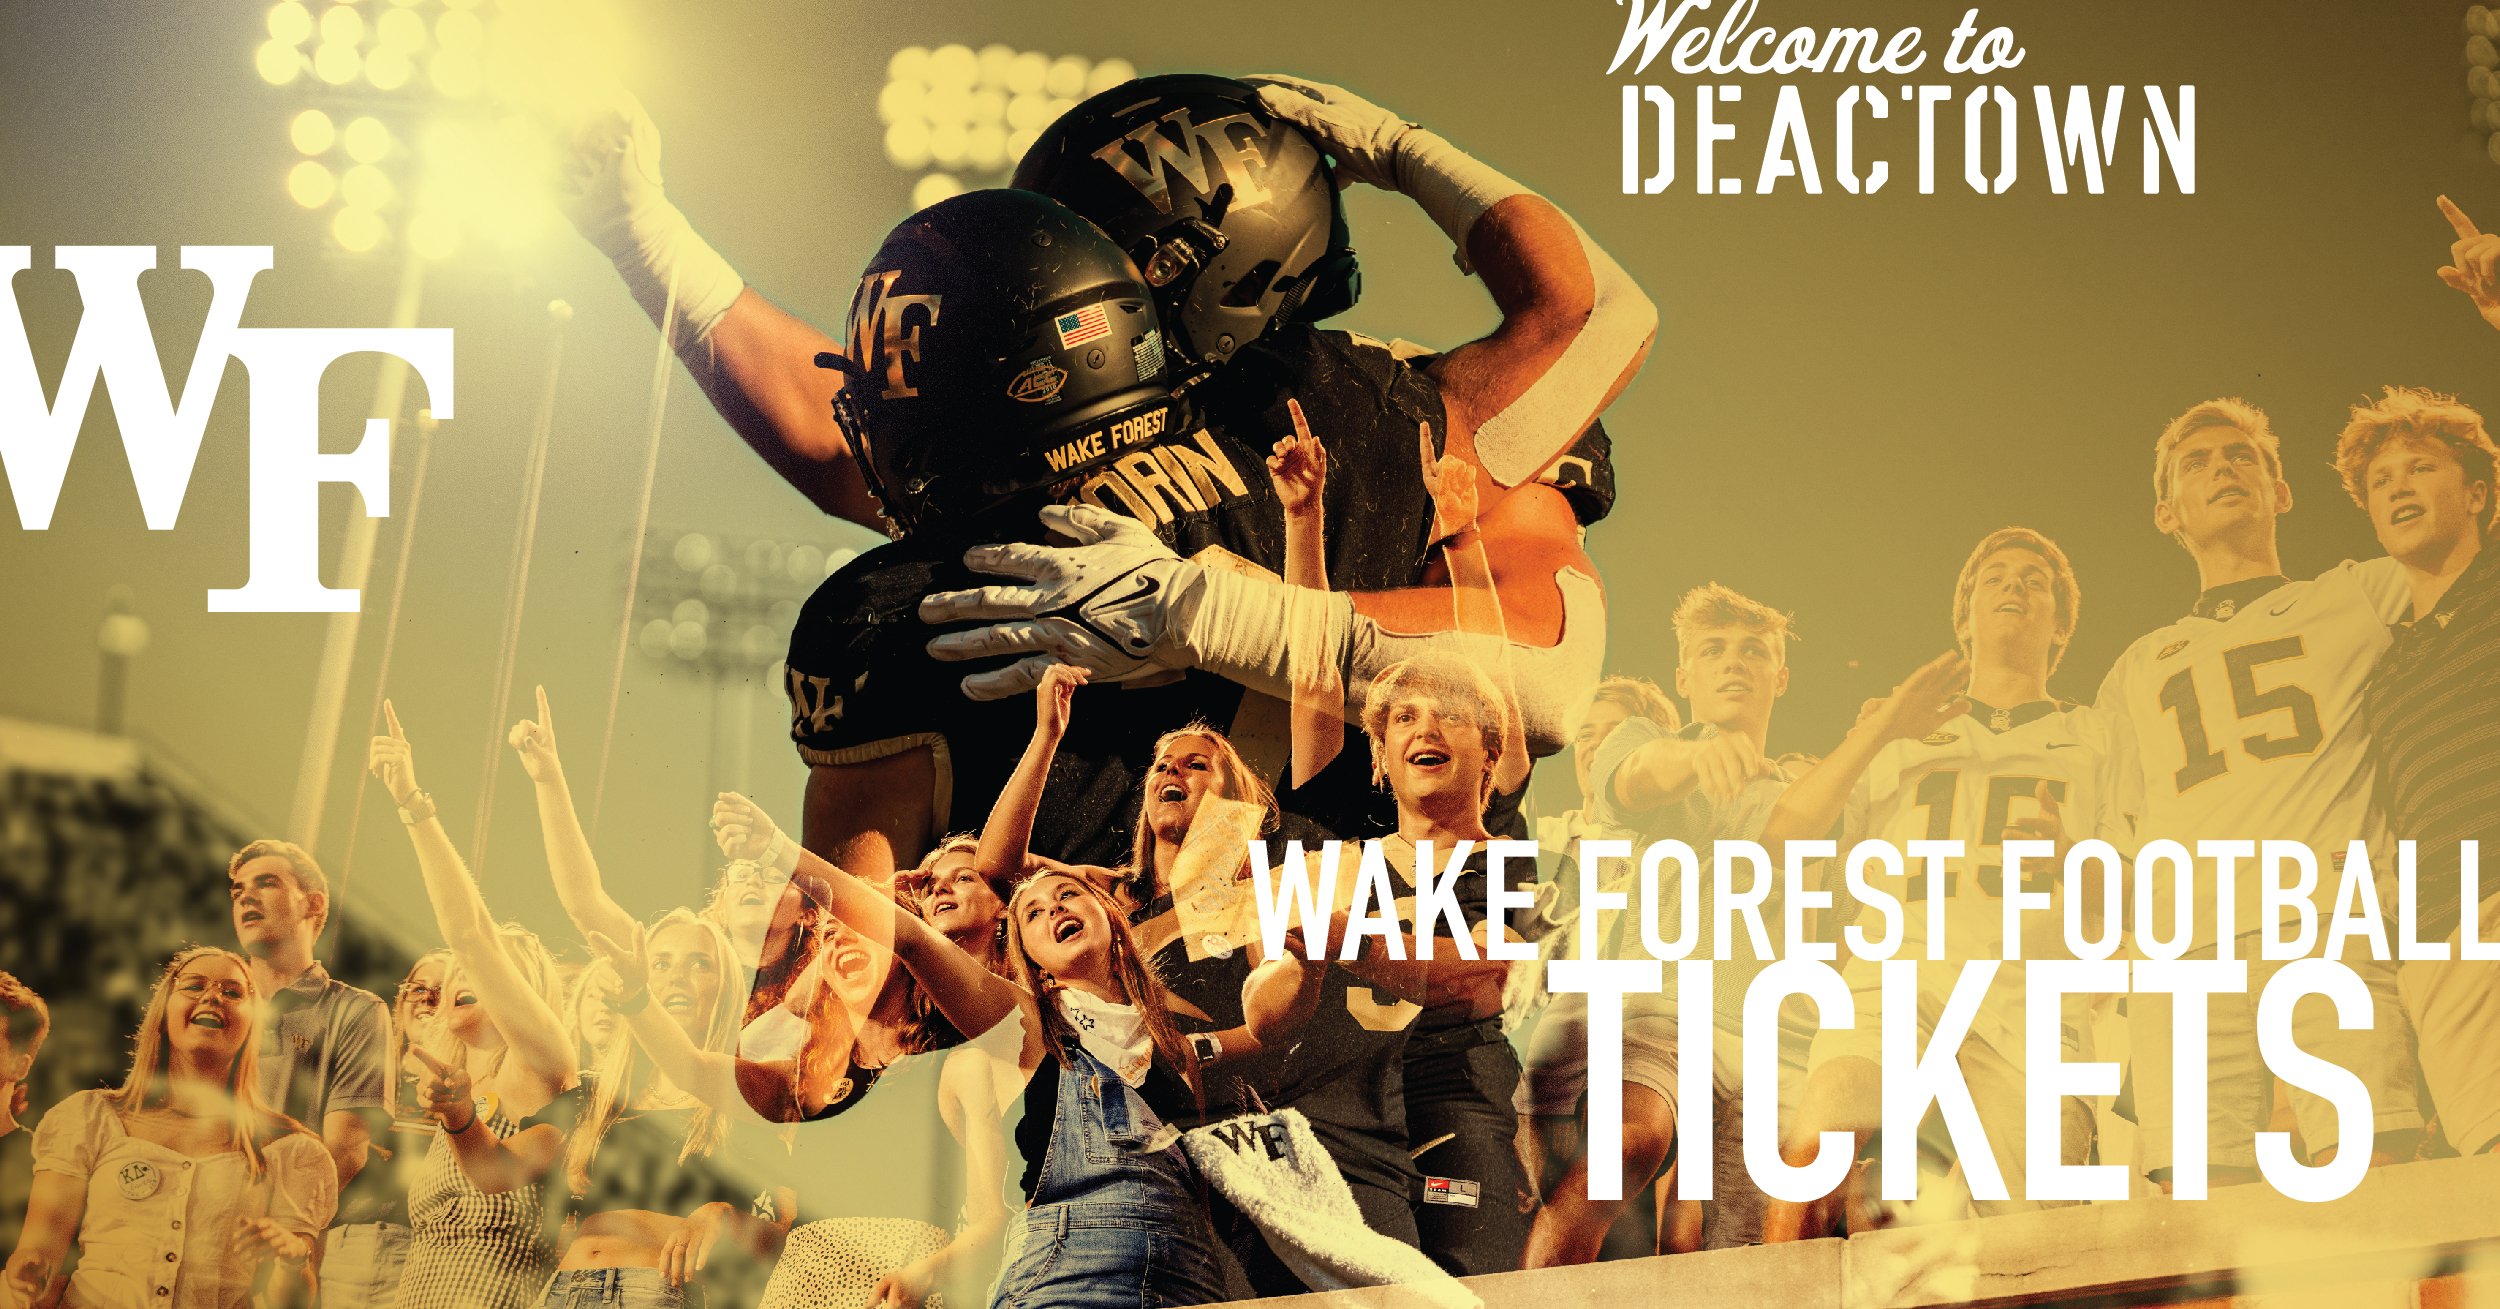 Wake Forest Football Tickets - Welcome to DEACTOWN